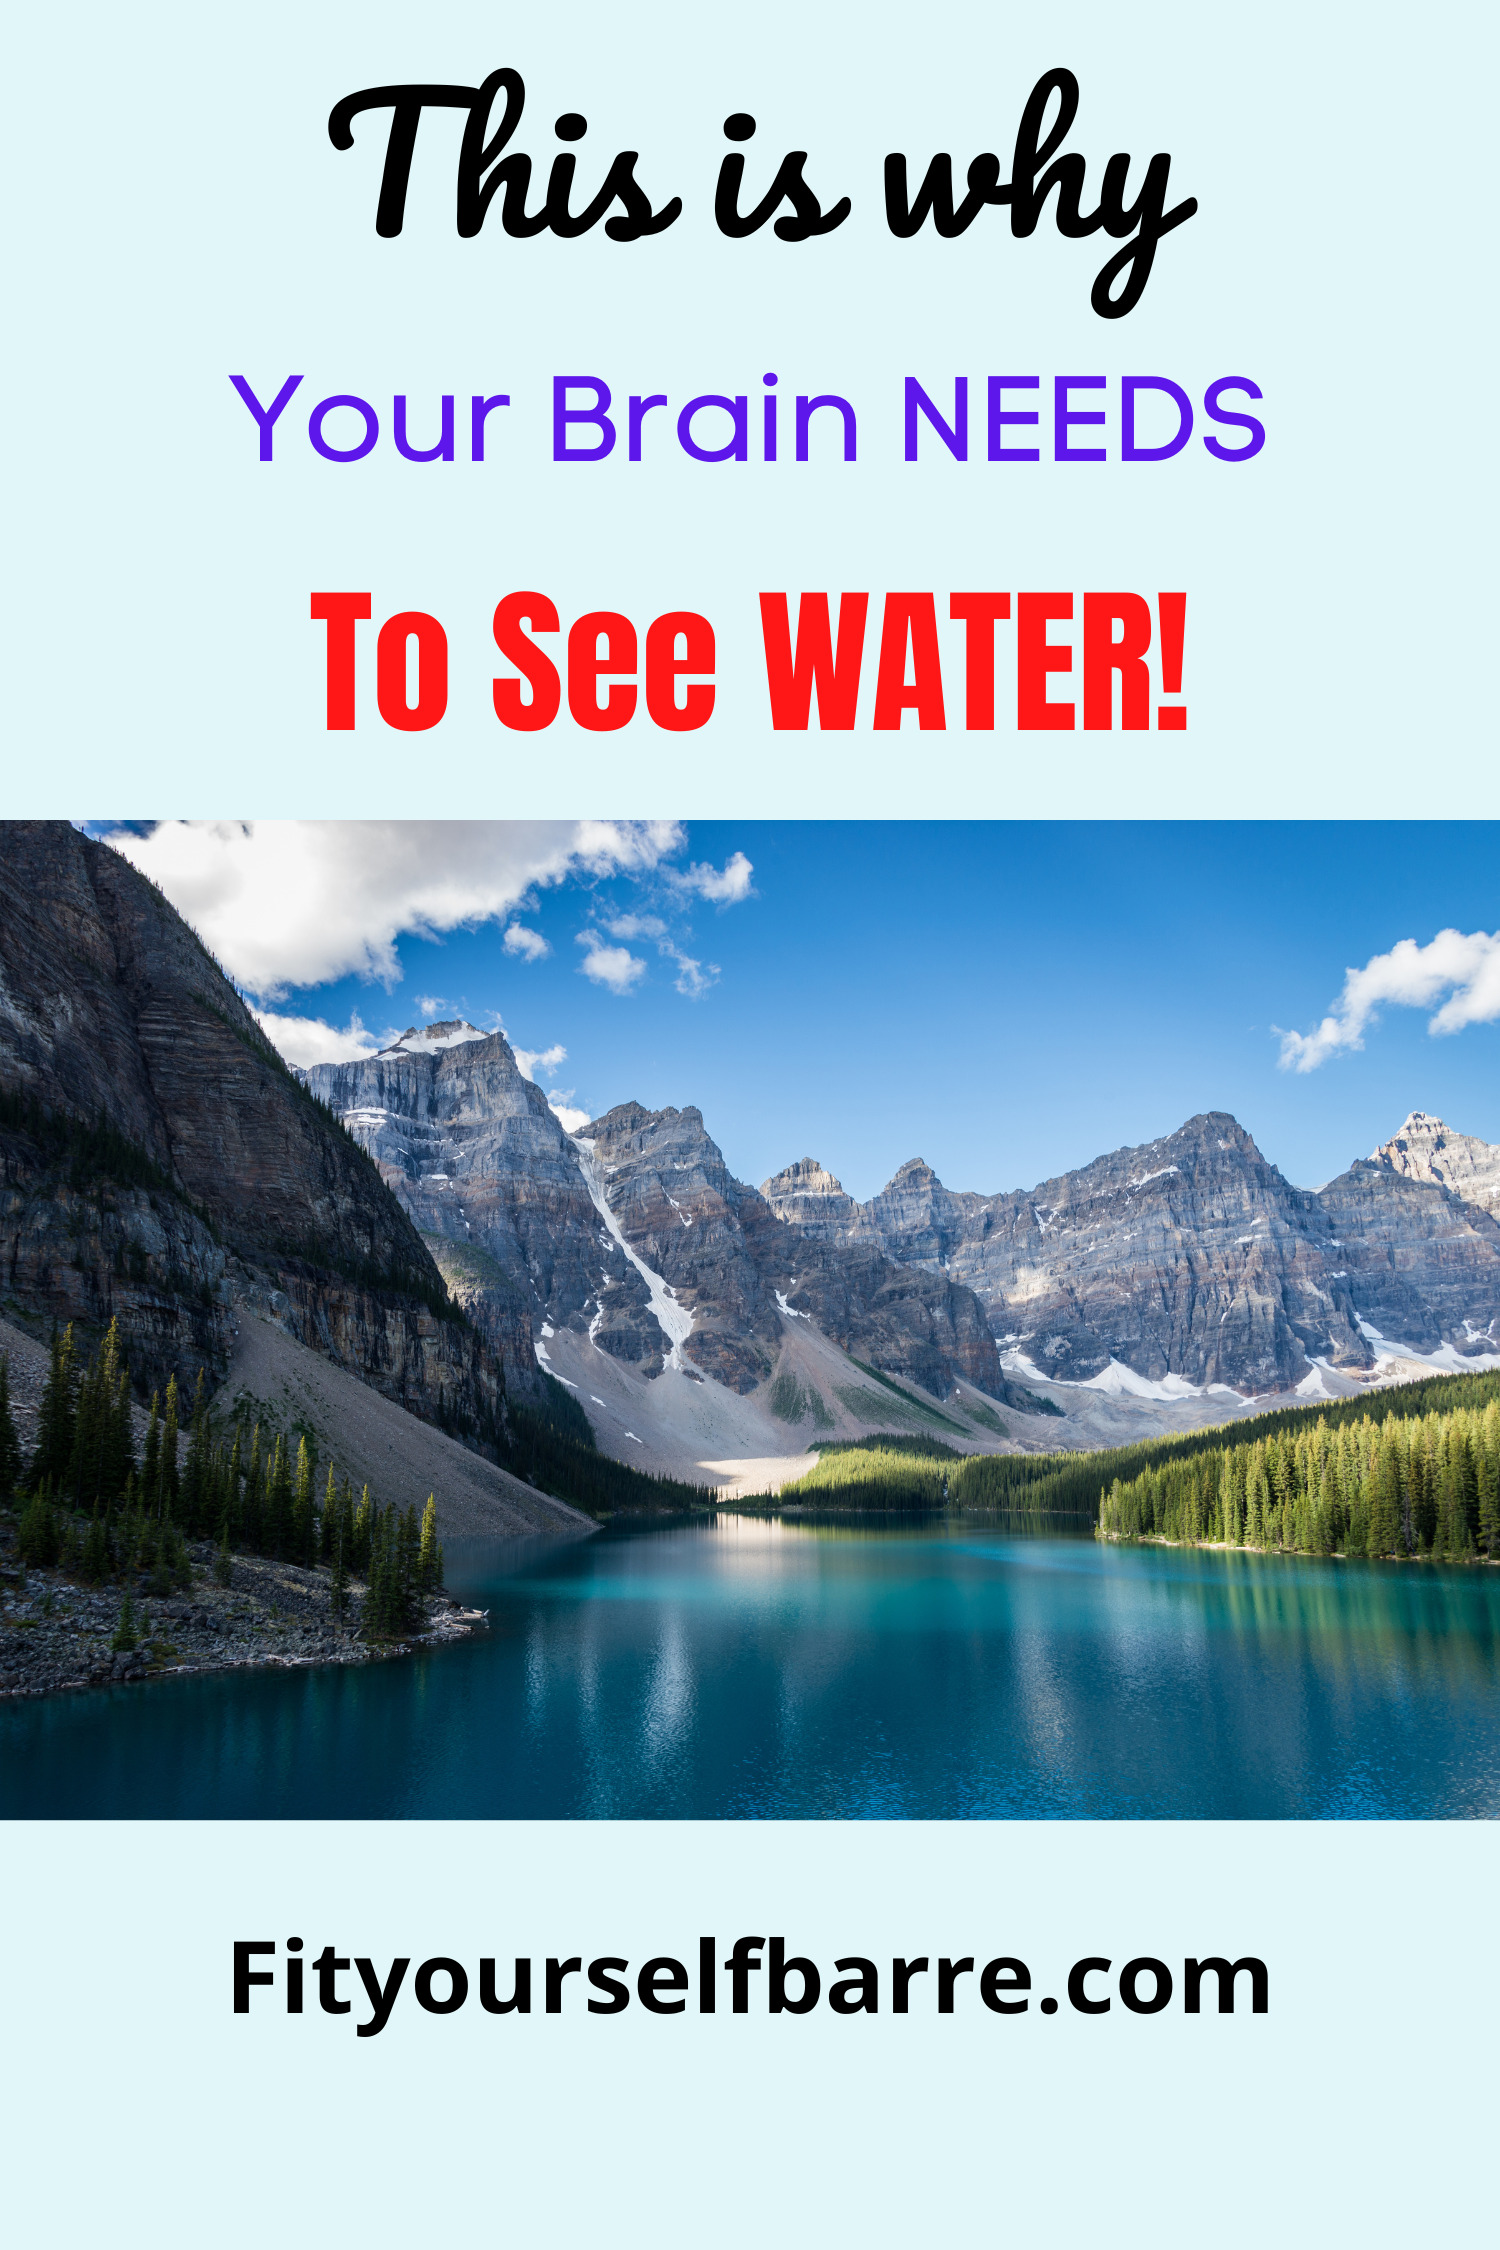 mental benefits of seeing water-scenic view of Moraine Lake in Canada